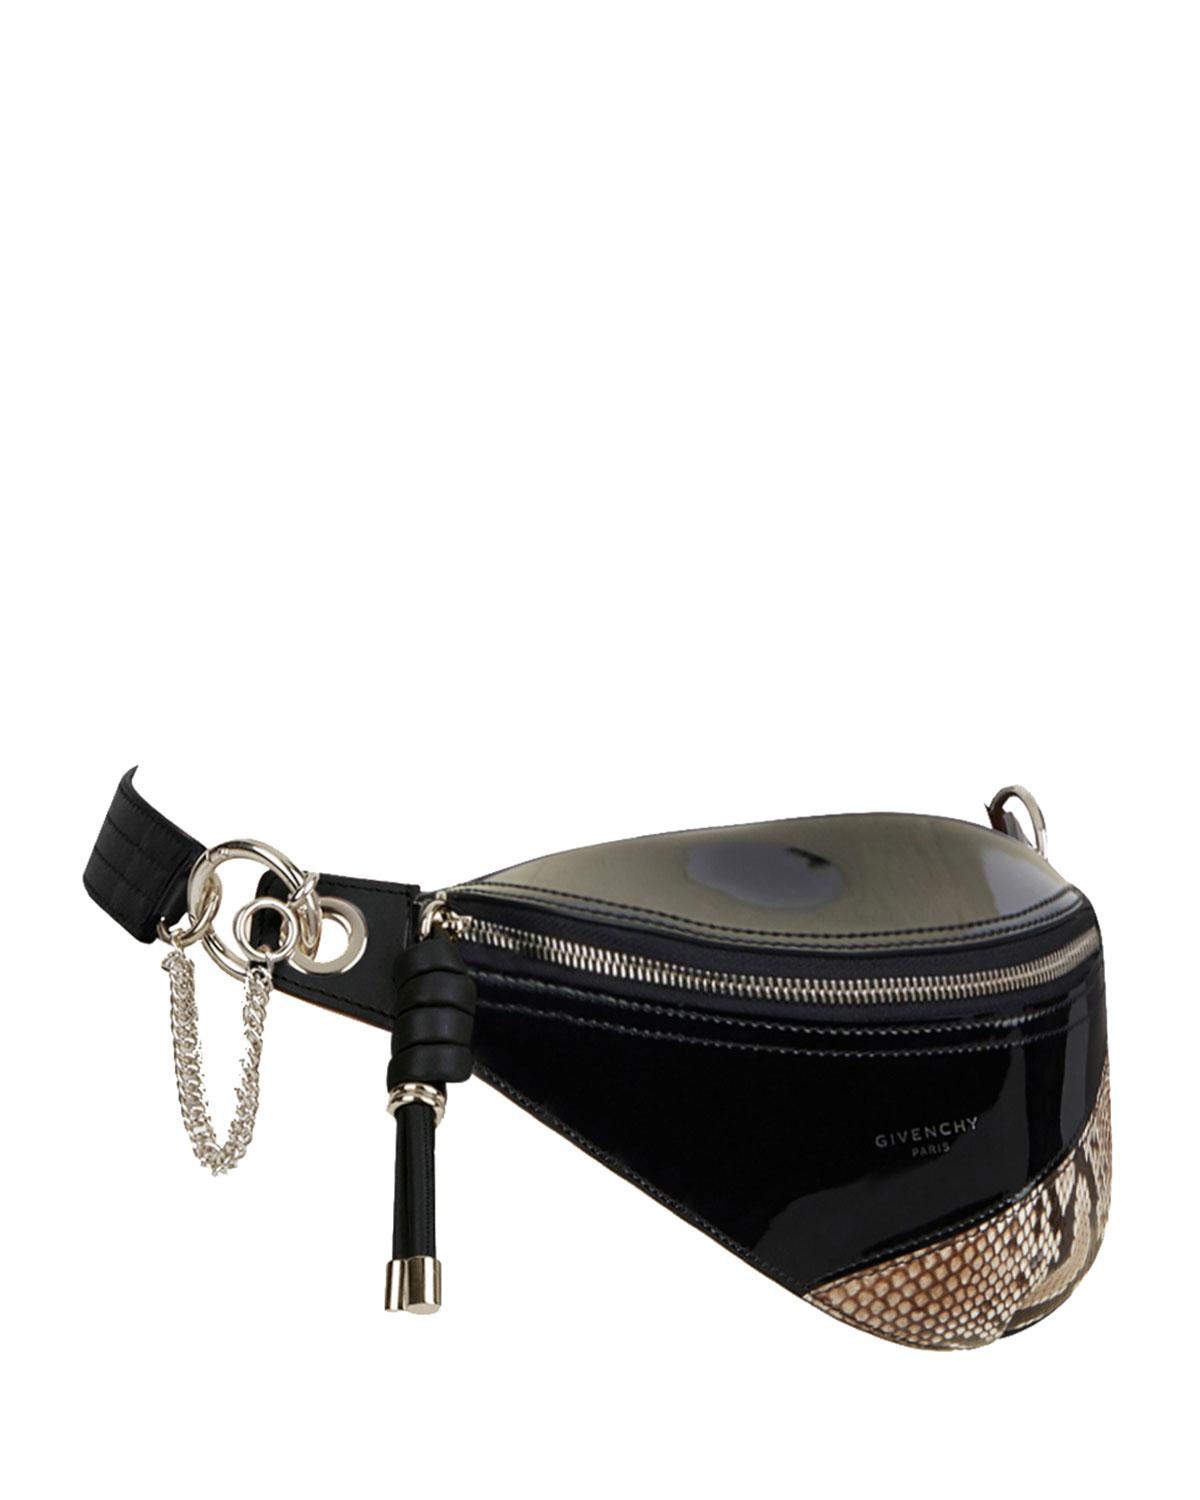 Givenchy Whip Mini Patent And Snakeskin Belt Bag in Black - Lyst